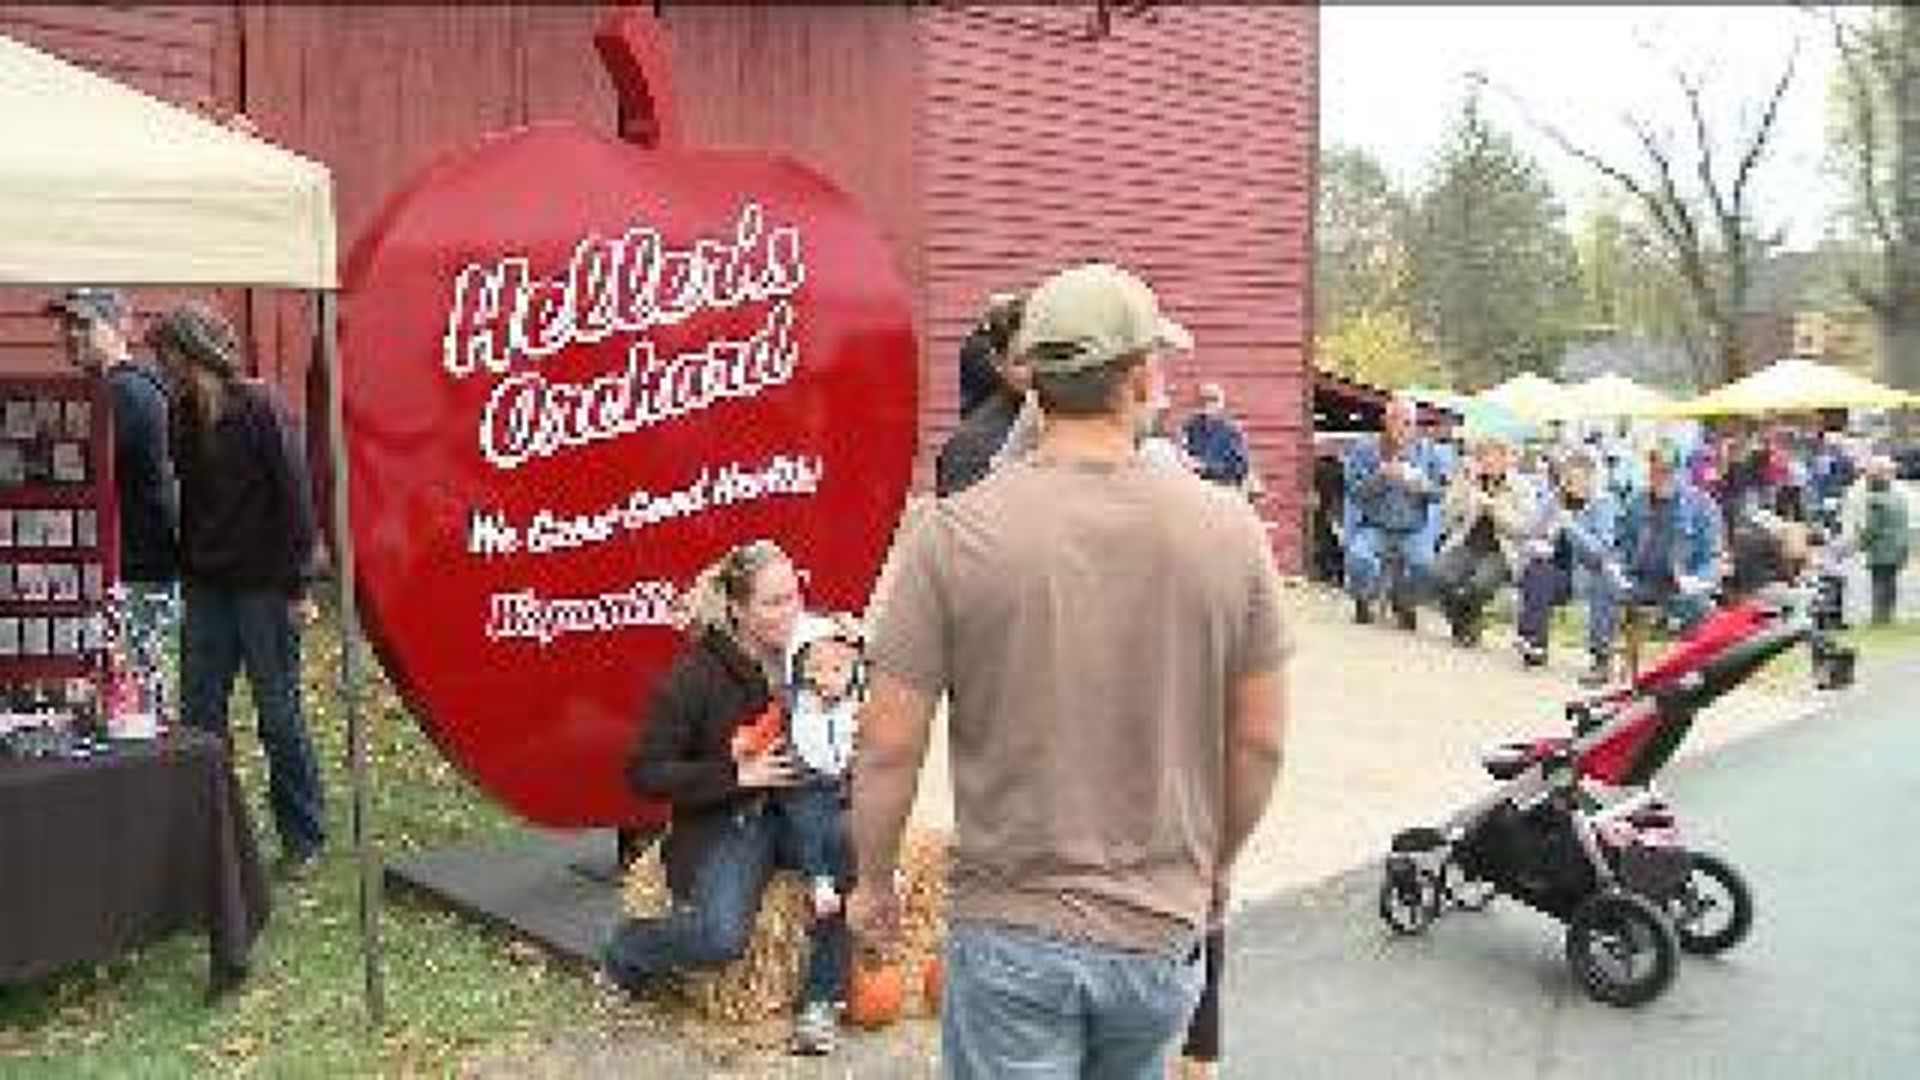 Families Celebrated Annual Apple Festival in Luzerne County